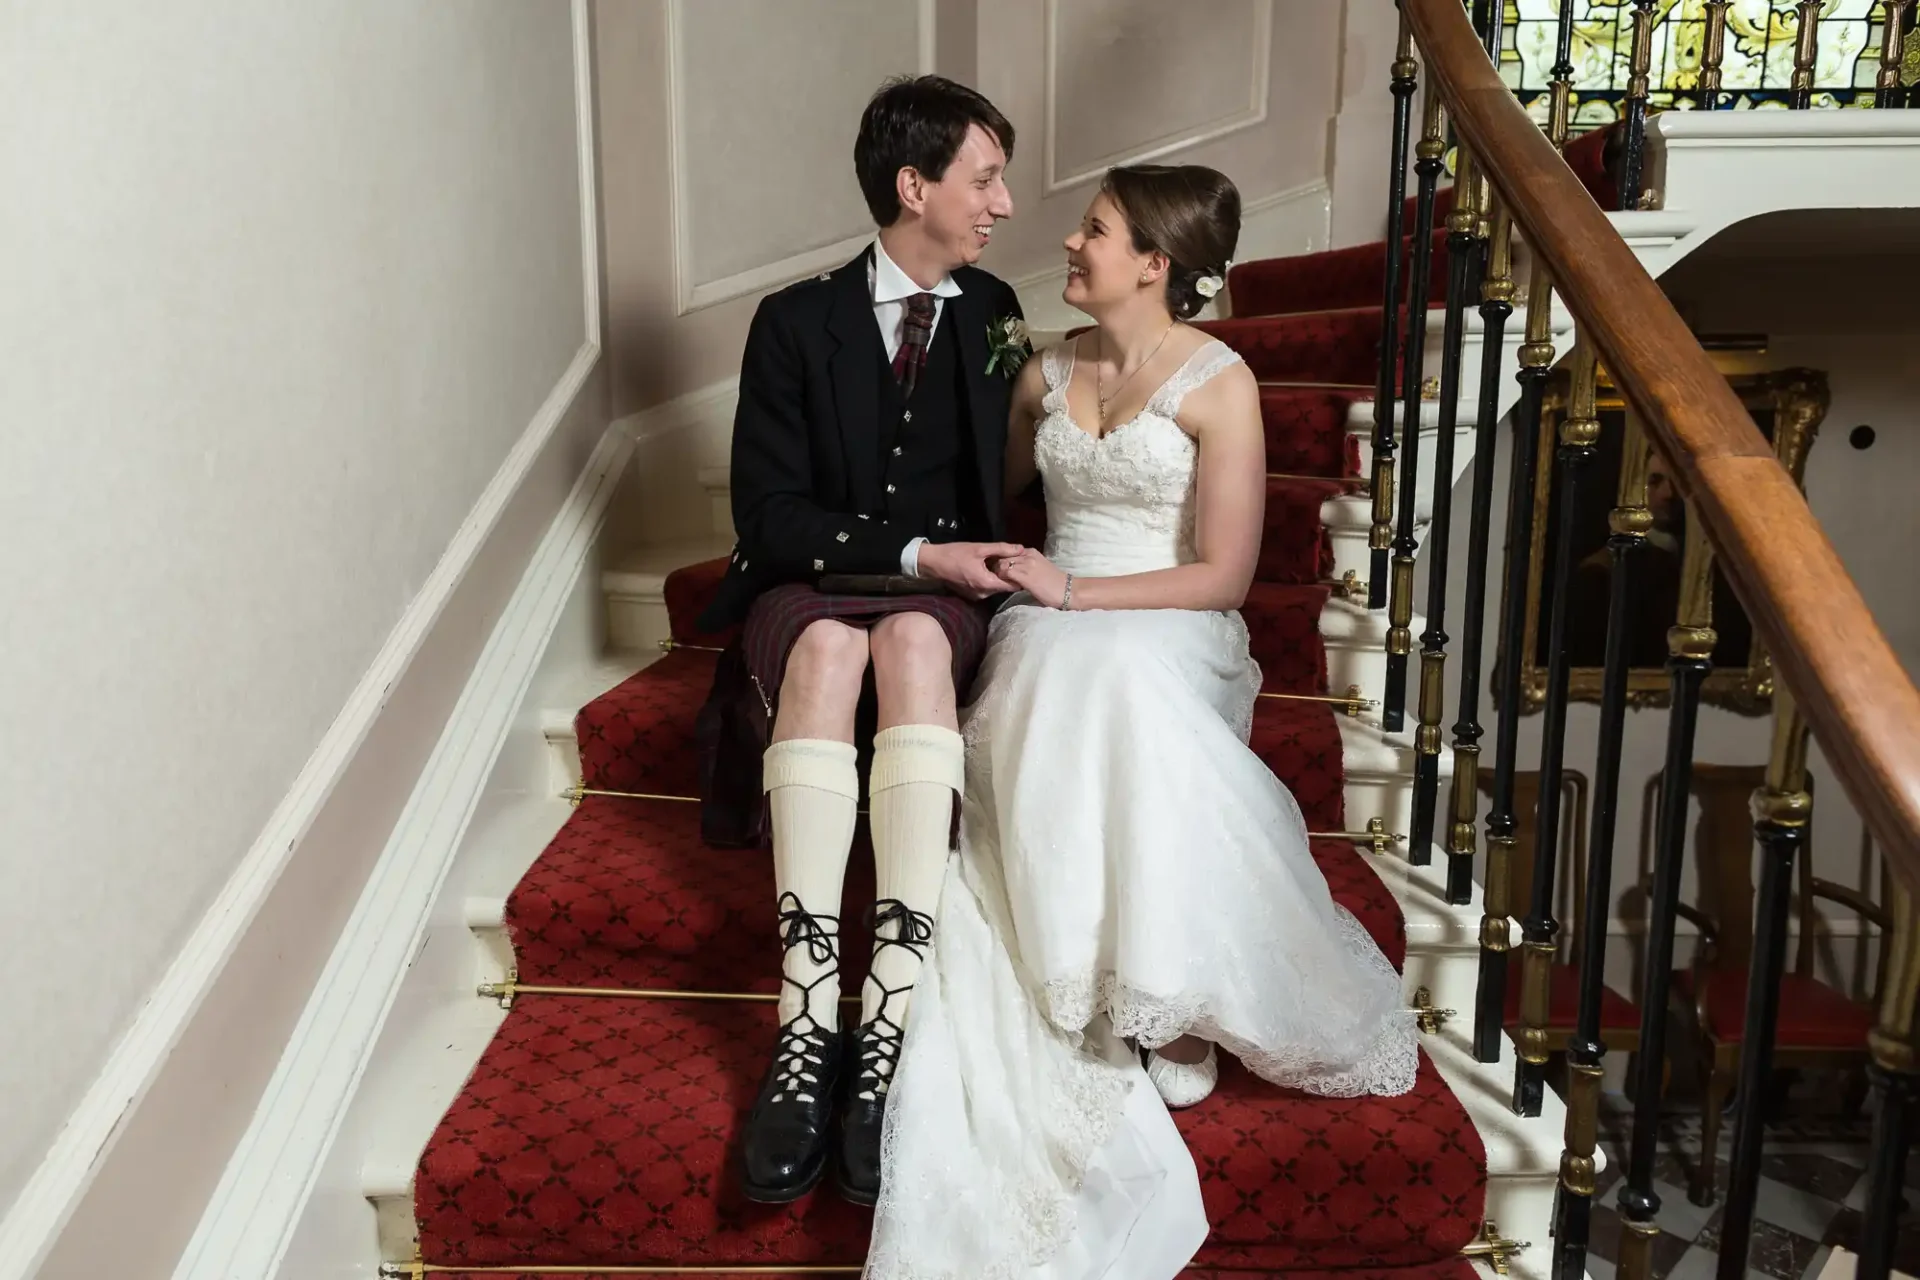 Newlyweds sitting on a red carpeted staircase, exchanging smiles. the groom is wearing a kilt and sporran, while the bride is in a white strapless dress.